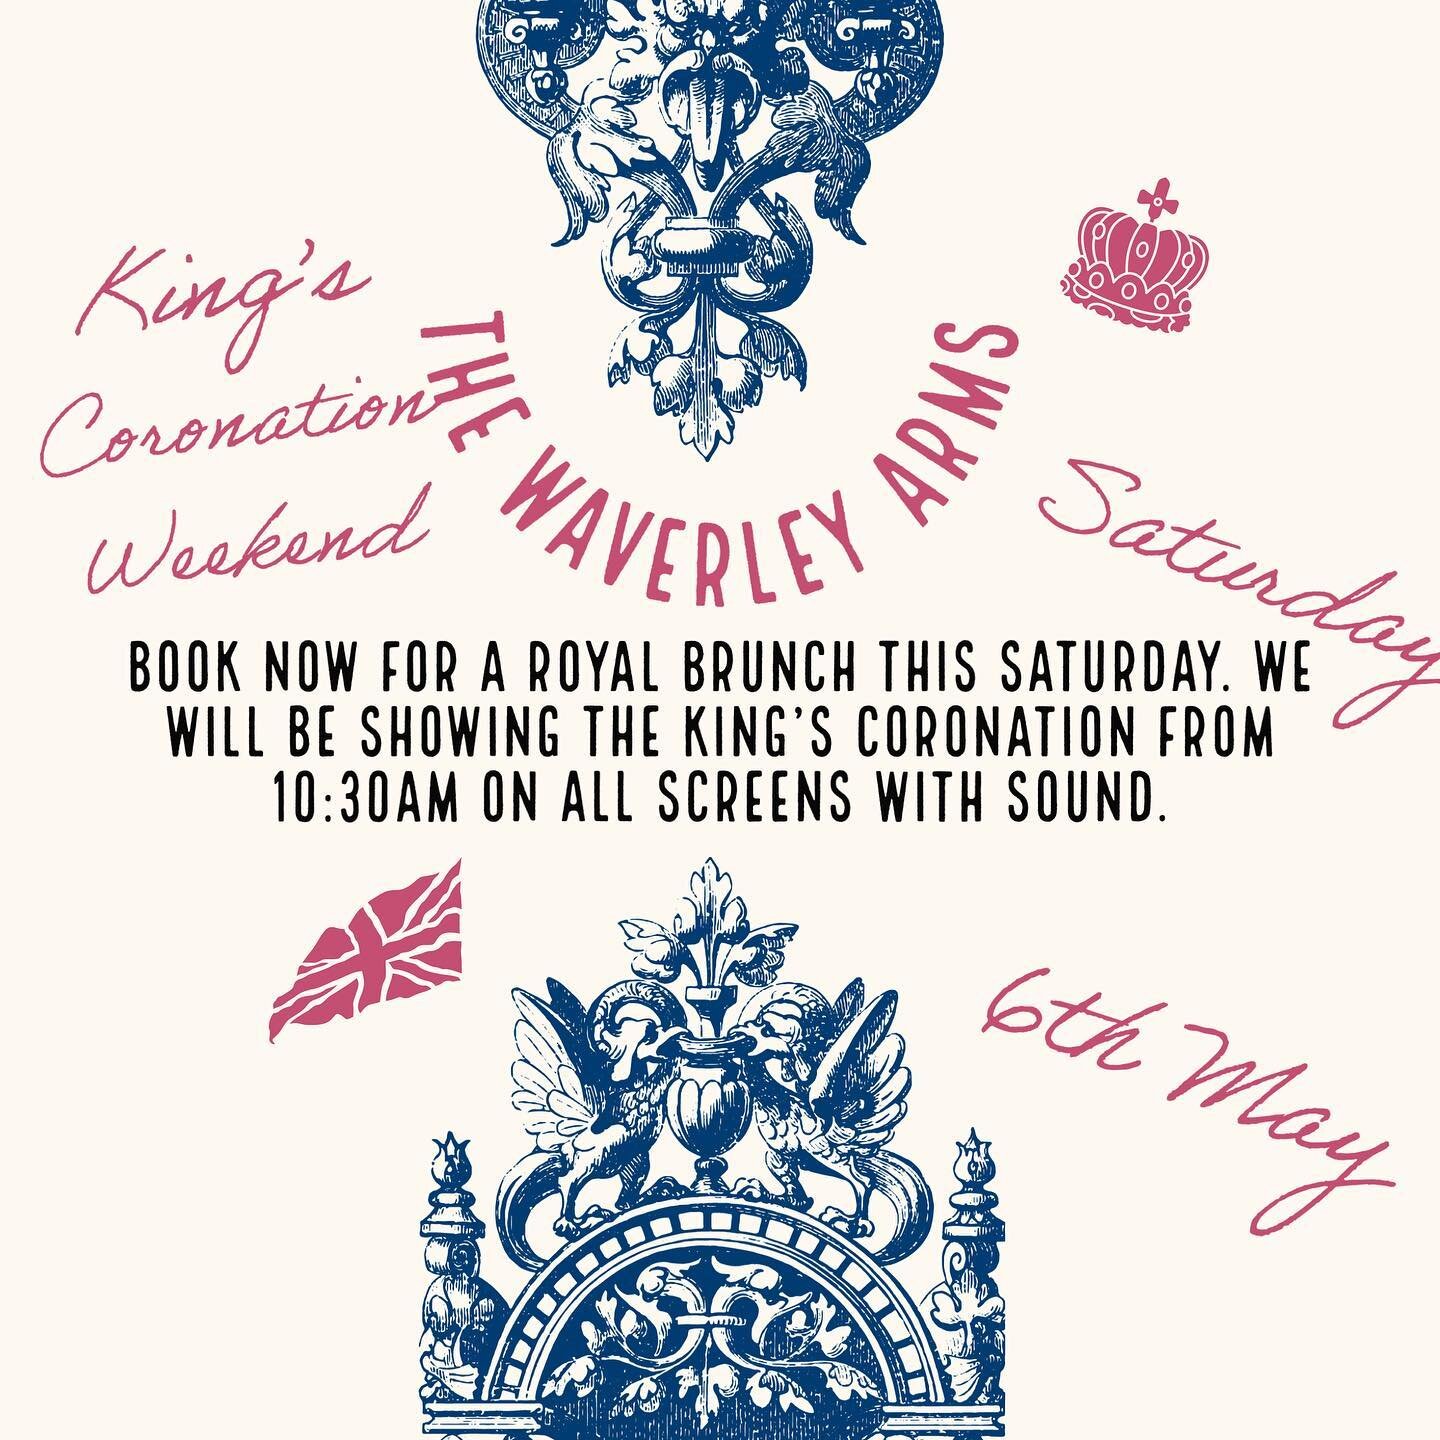 Saturday of this bank holiday weekend 🤩 Come down for a royal brunch and see the King get crowned on all our screens! 🤴